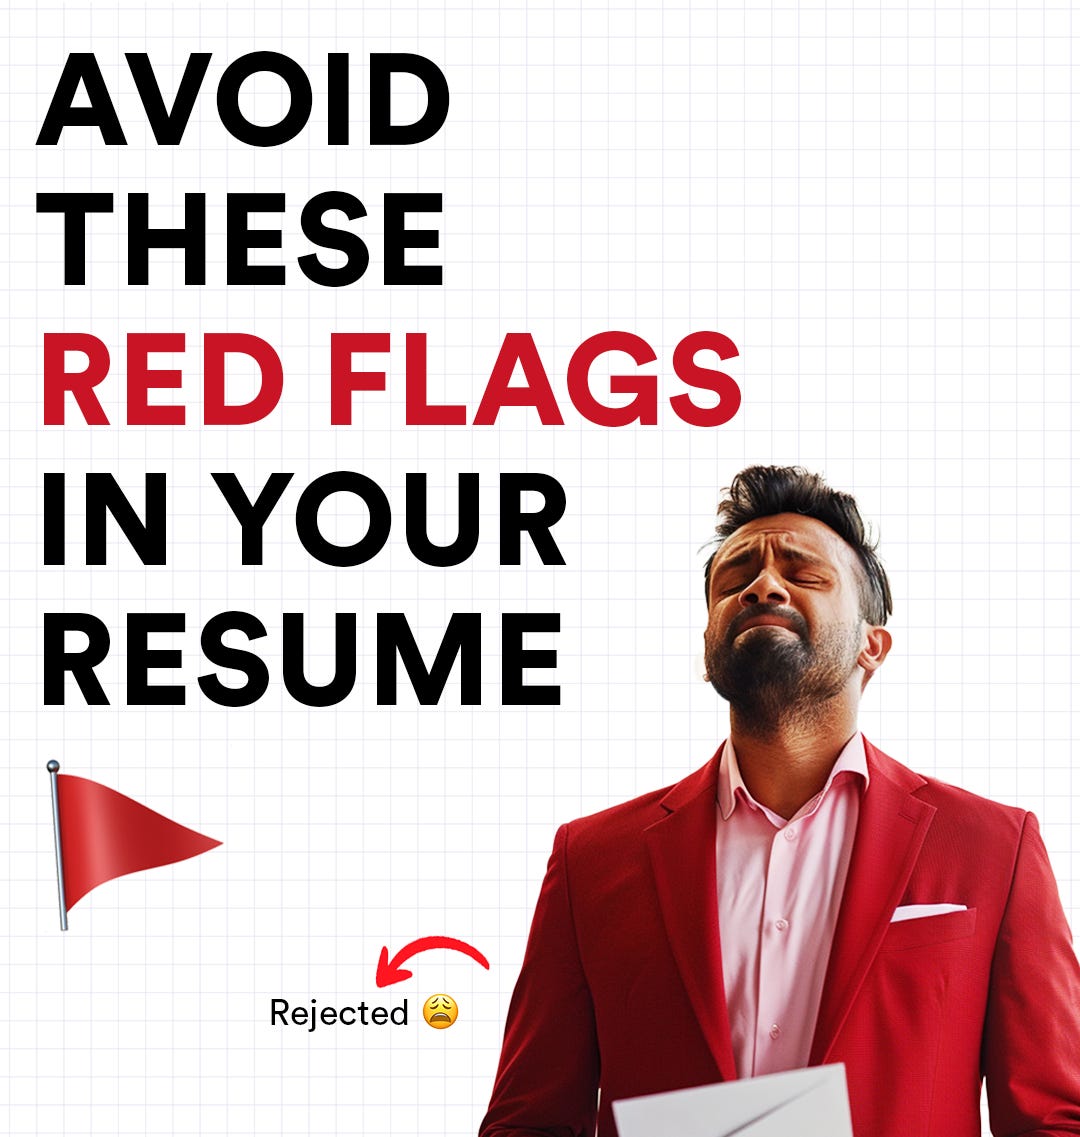 Letsupgrade blog is about giving solution on avoiding the red flags in resume and giving interview tips for 2024. It helps in building the resume